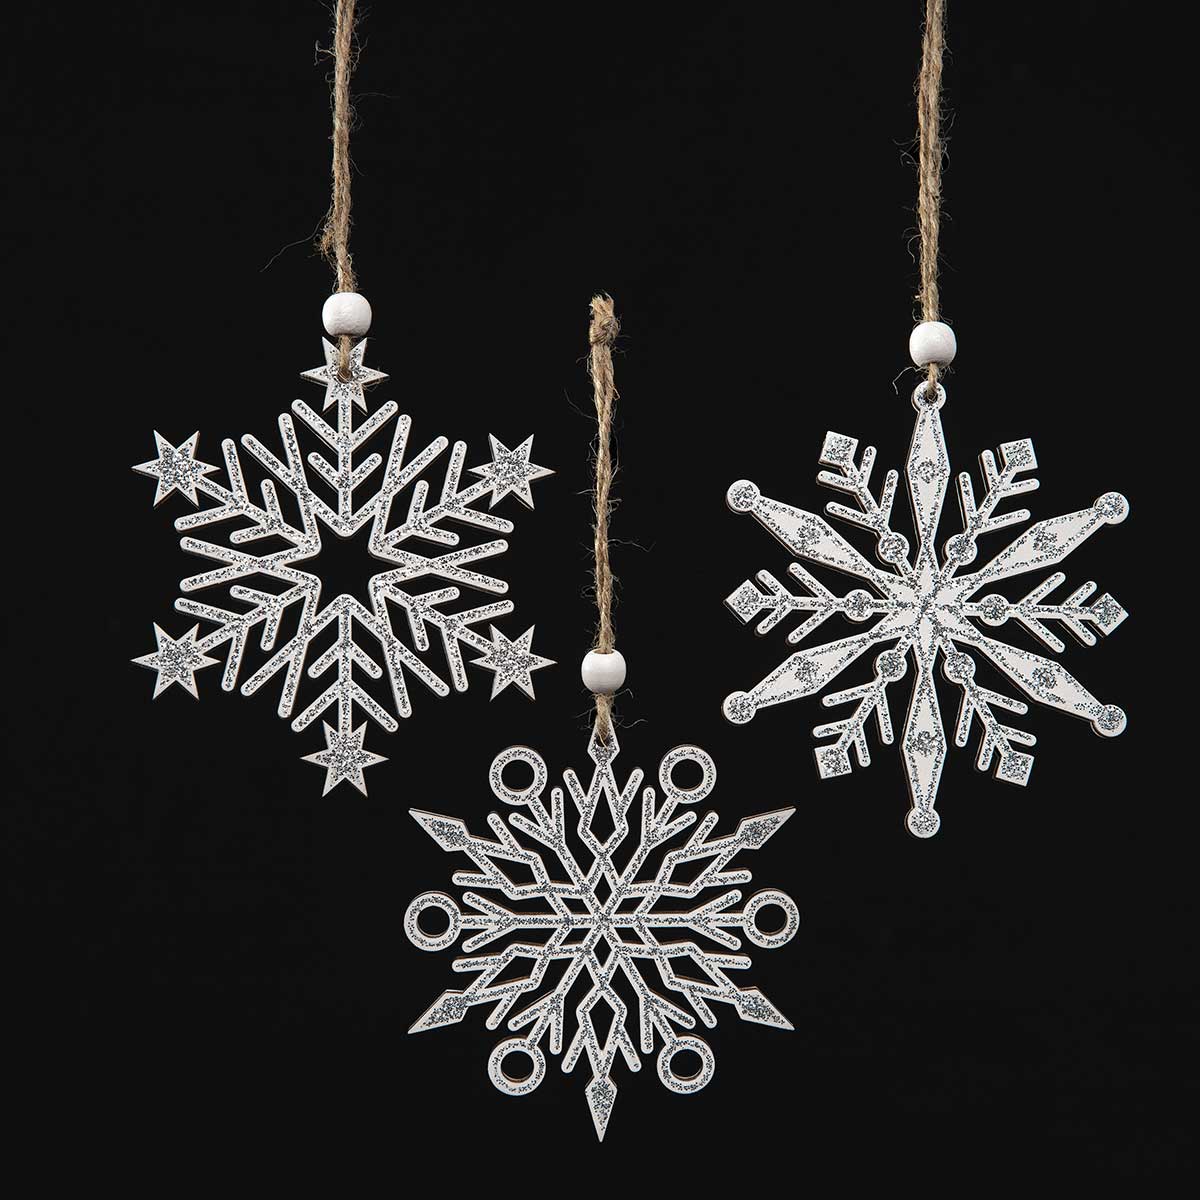 ORN SPARKLE SNOWFLAKE 3 ASSORTED 4IN X .25IN X 4IN WHITE